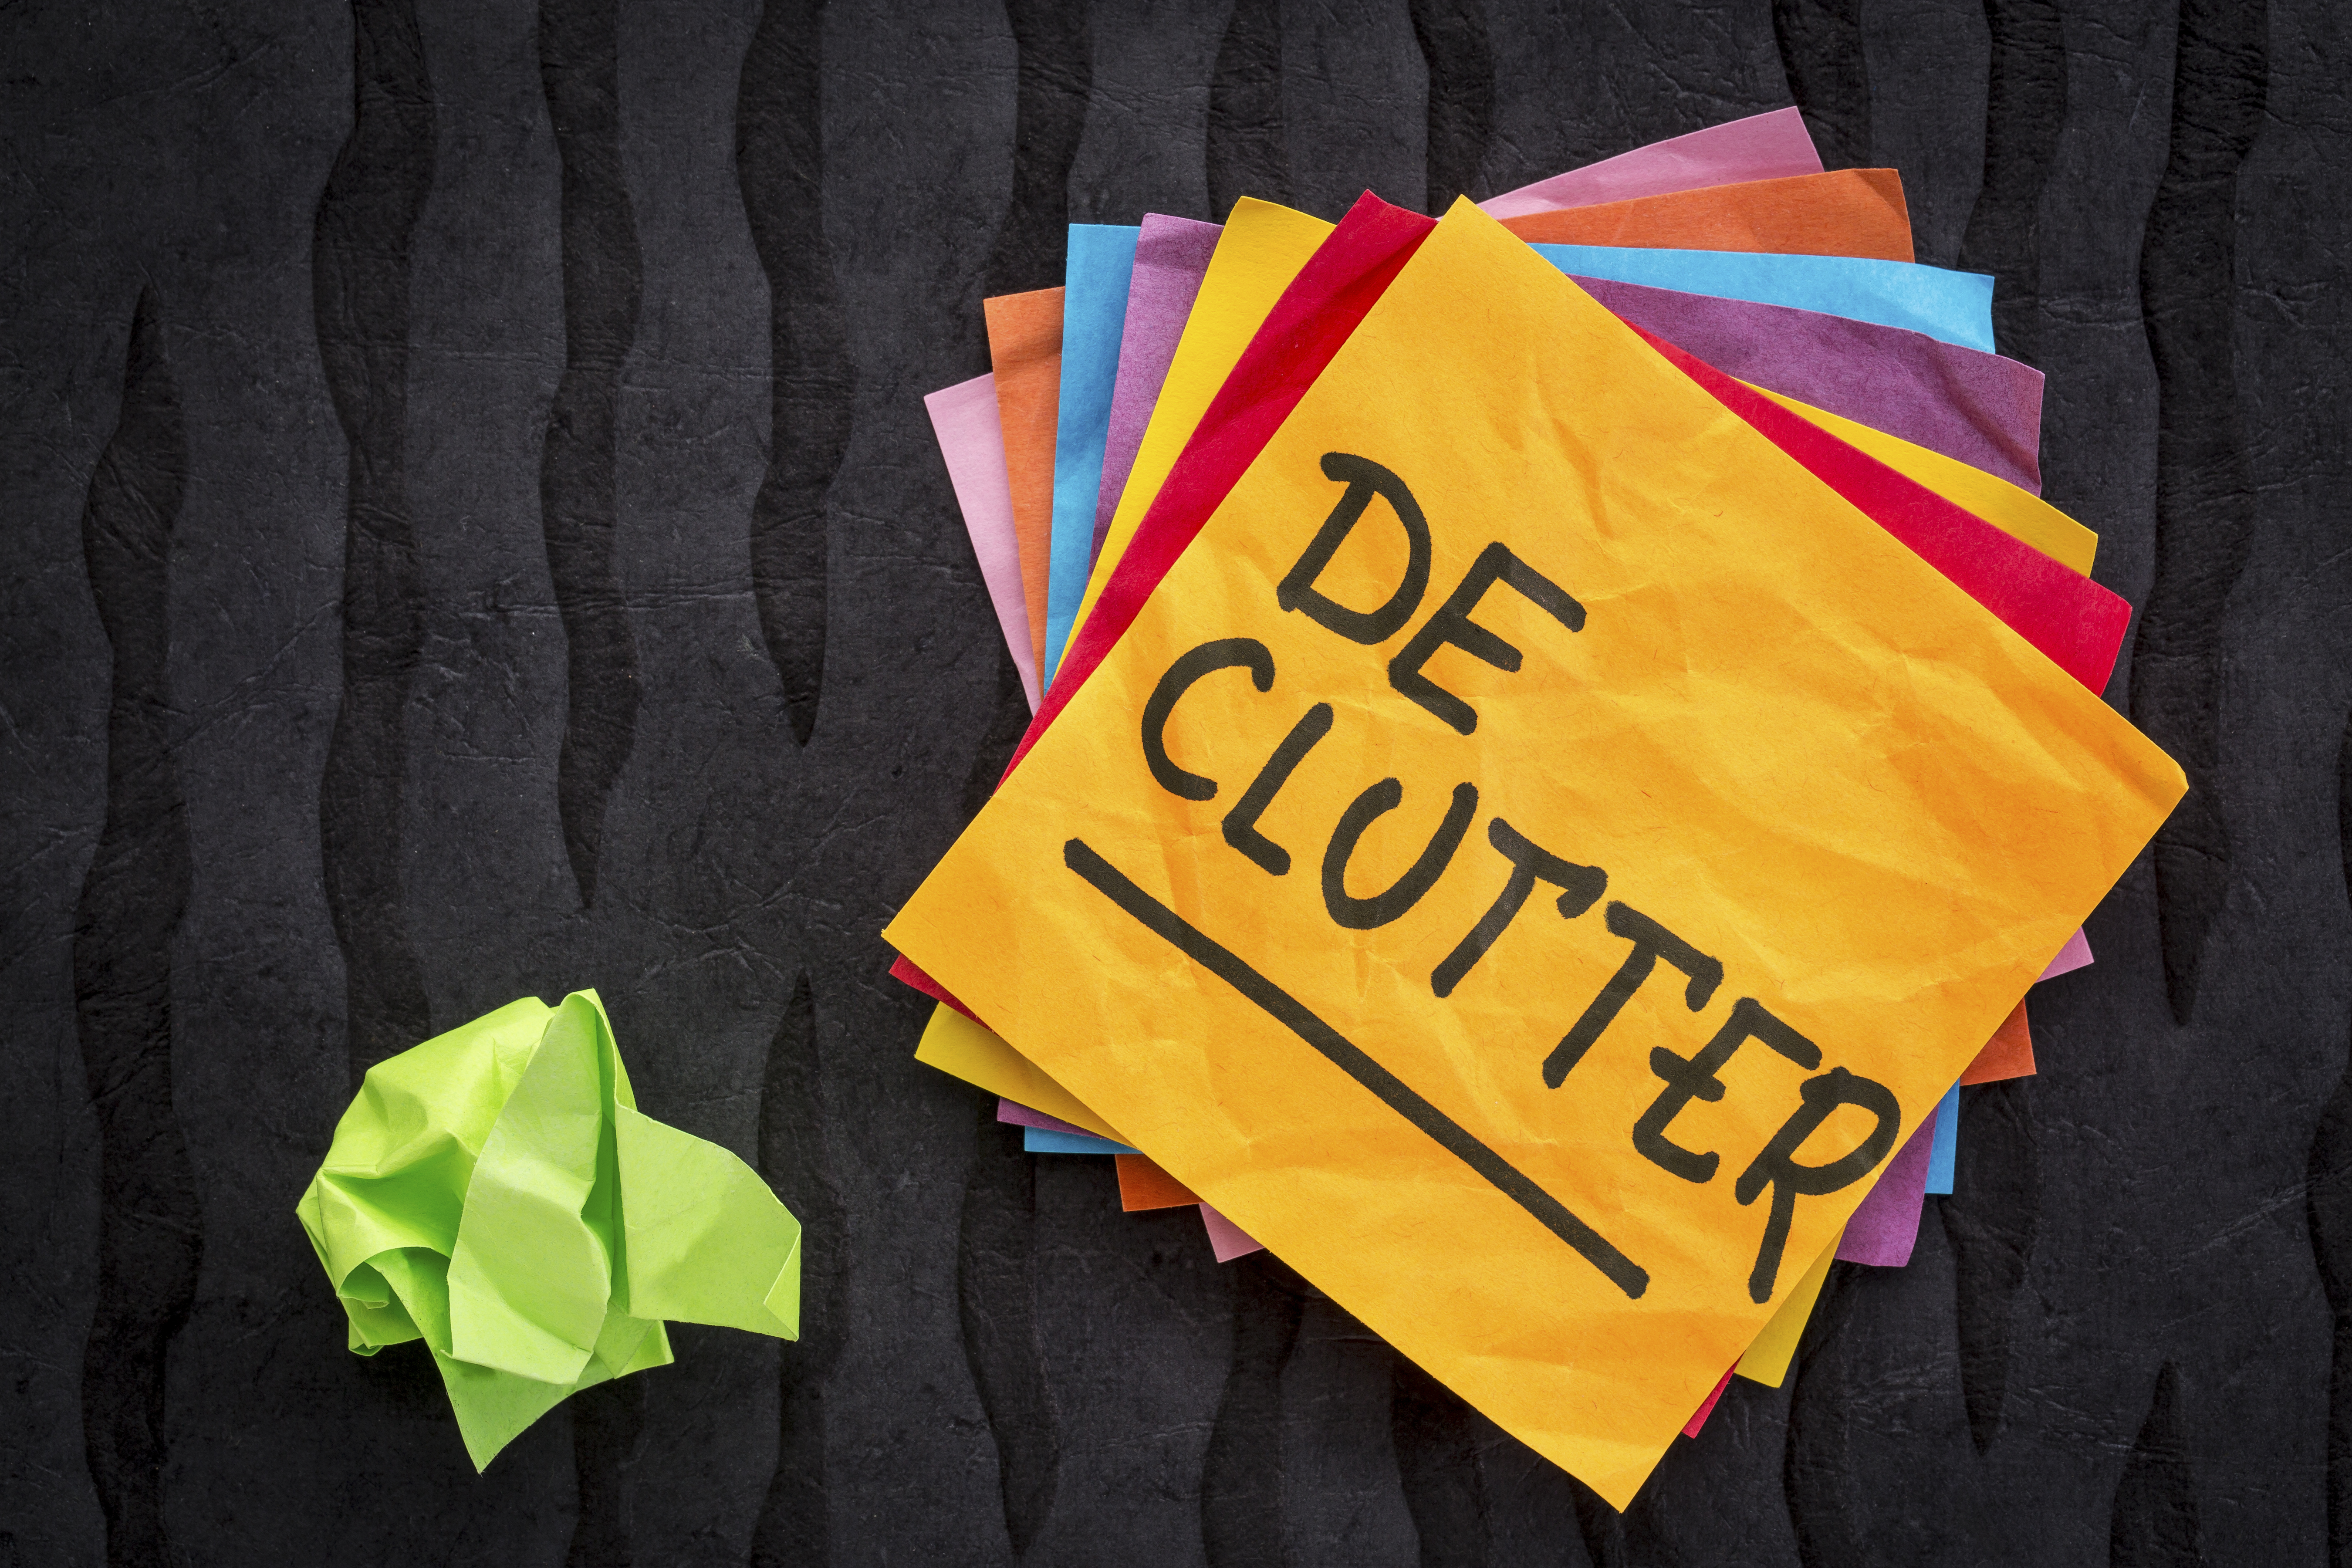 A colorful stack of sticky notes with "de-clutter" written on the top